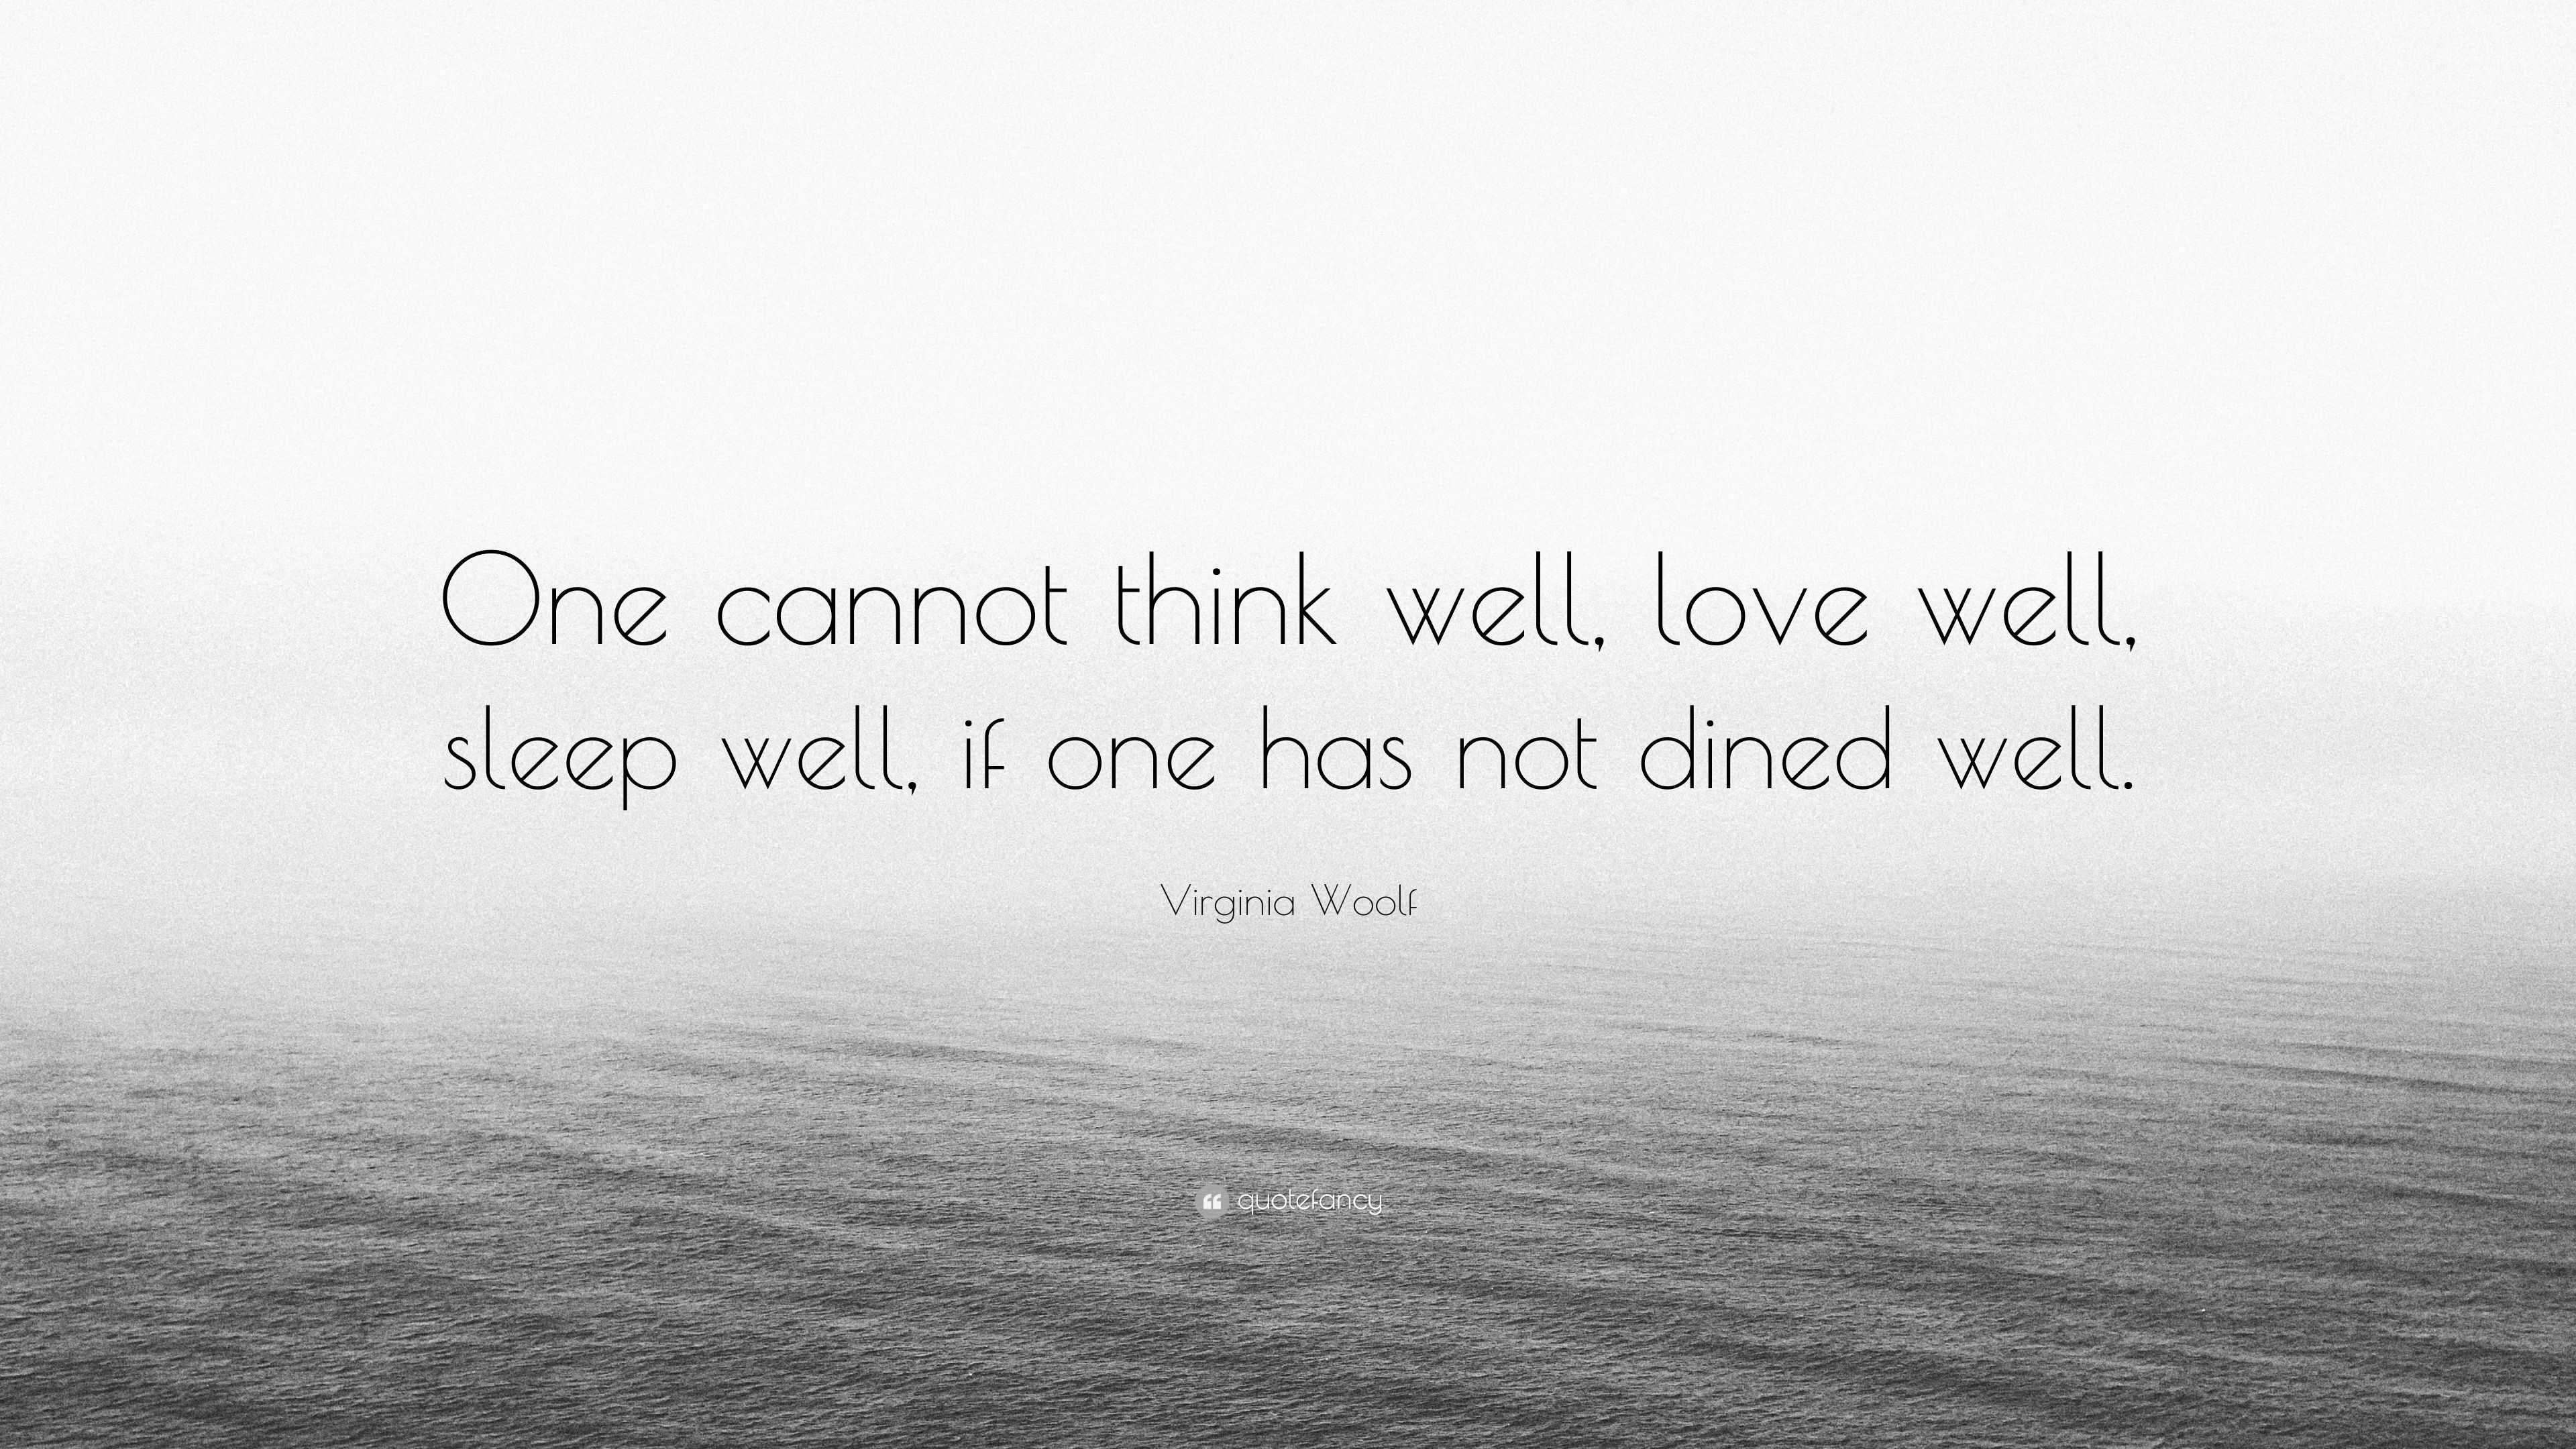 Virginia Woolf Quote: "One cannot think well, love well, sleep well, if one has not dined well."